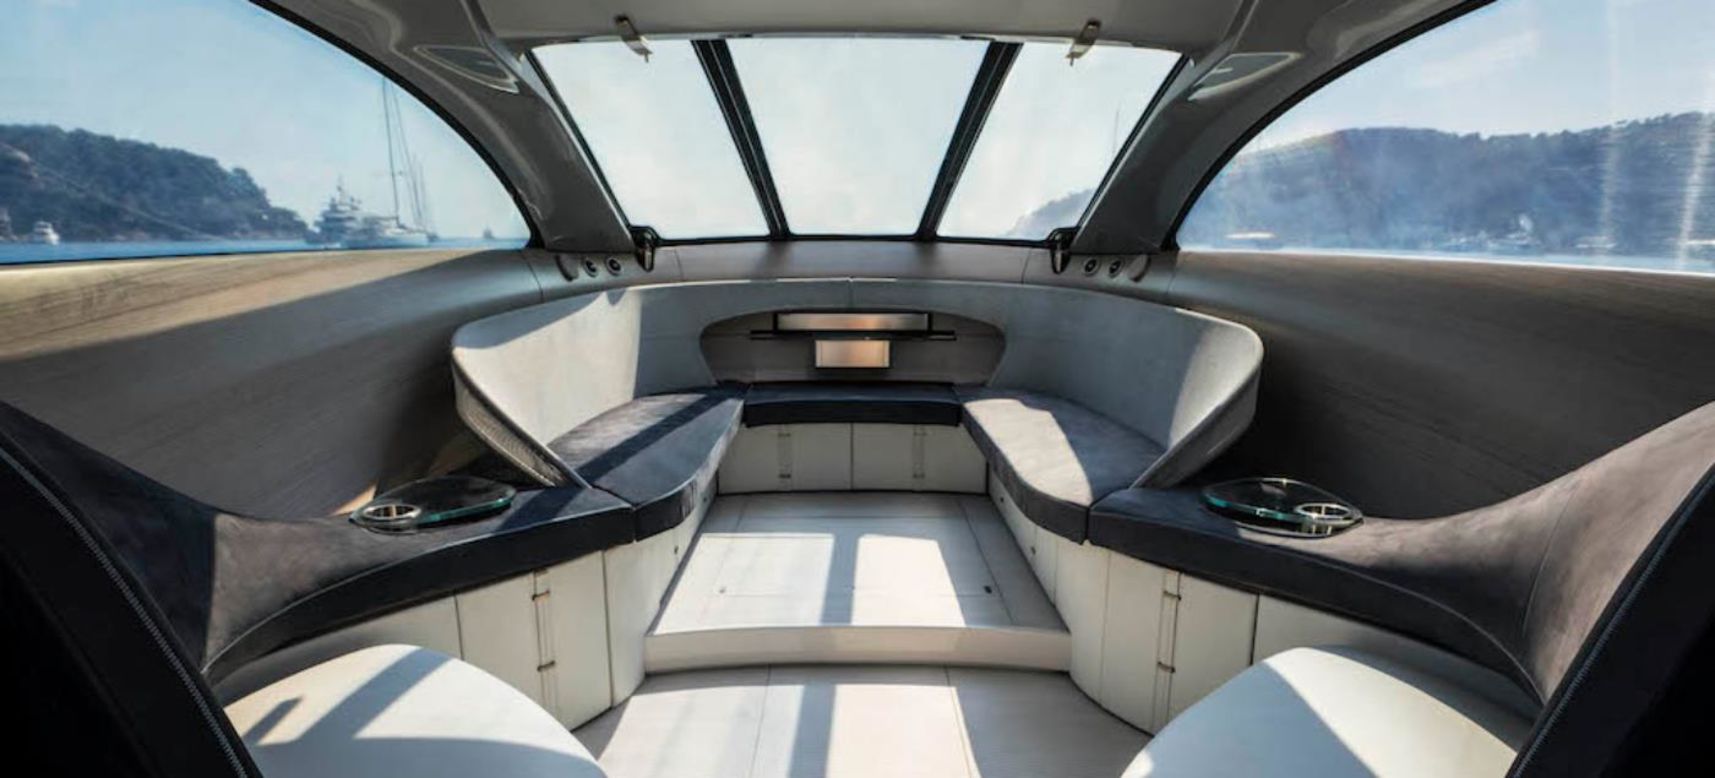 The 14.17-meter motor yacht incorporates new luxury design and materials to provide unique aesthetic appeal. "The yacht ditches the conventional compartmentalized layout and uses space and light to spectacular new effect," Mercedes says of its design.